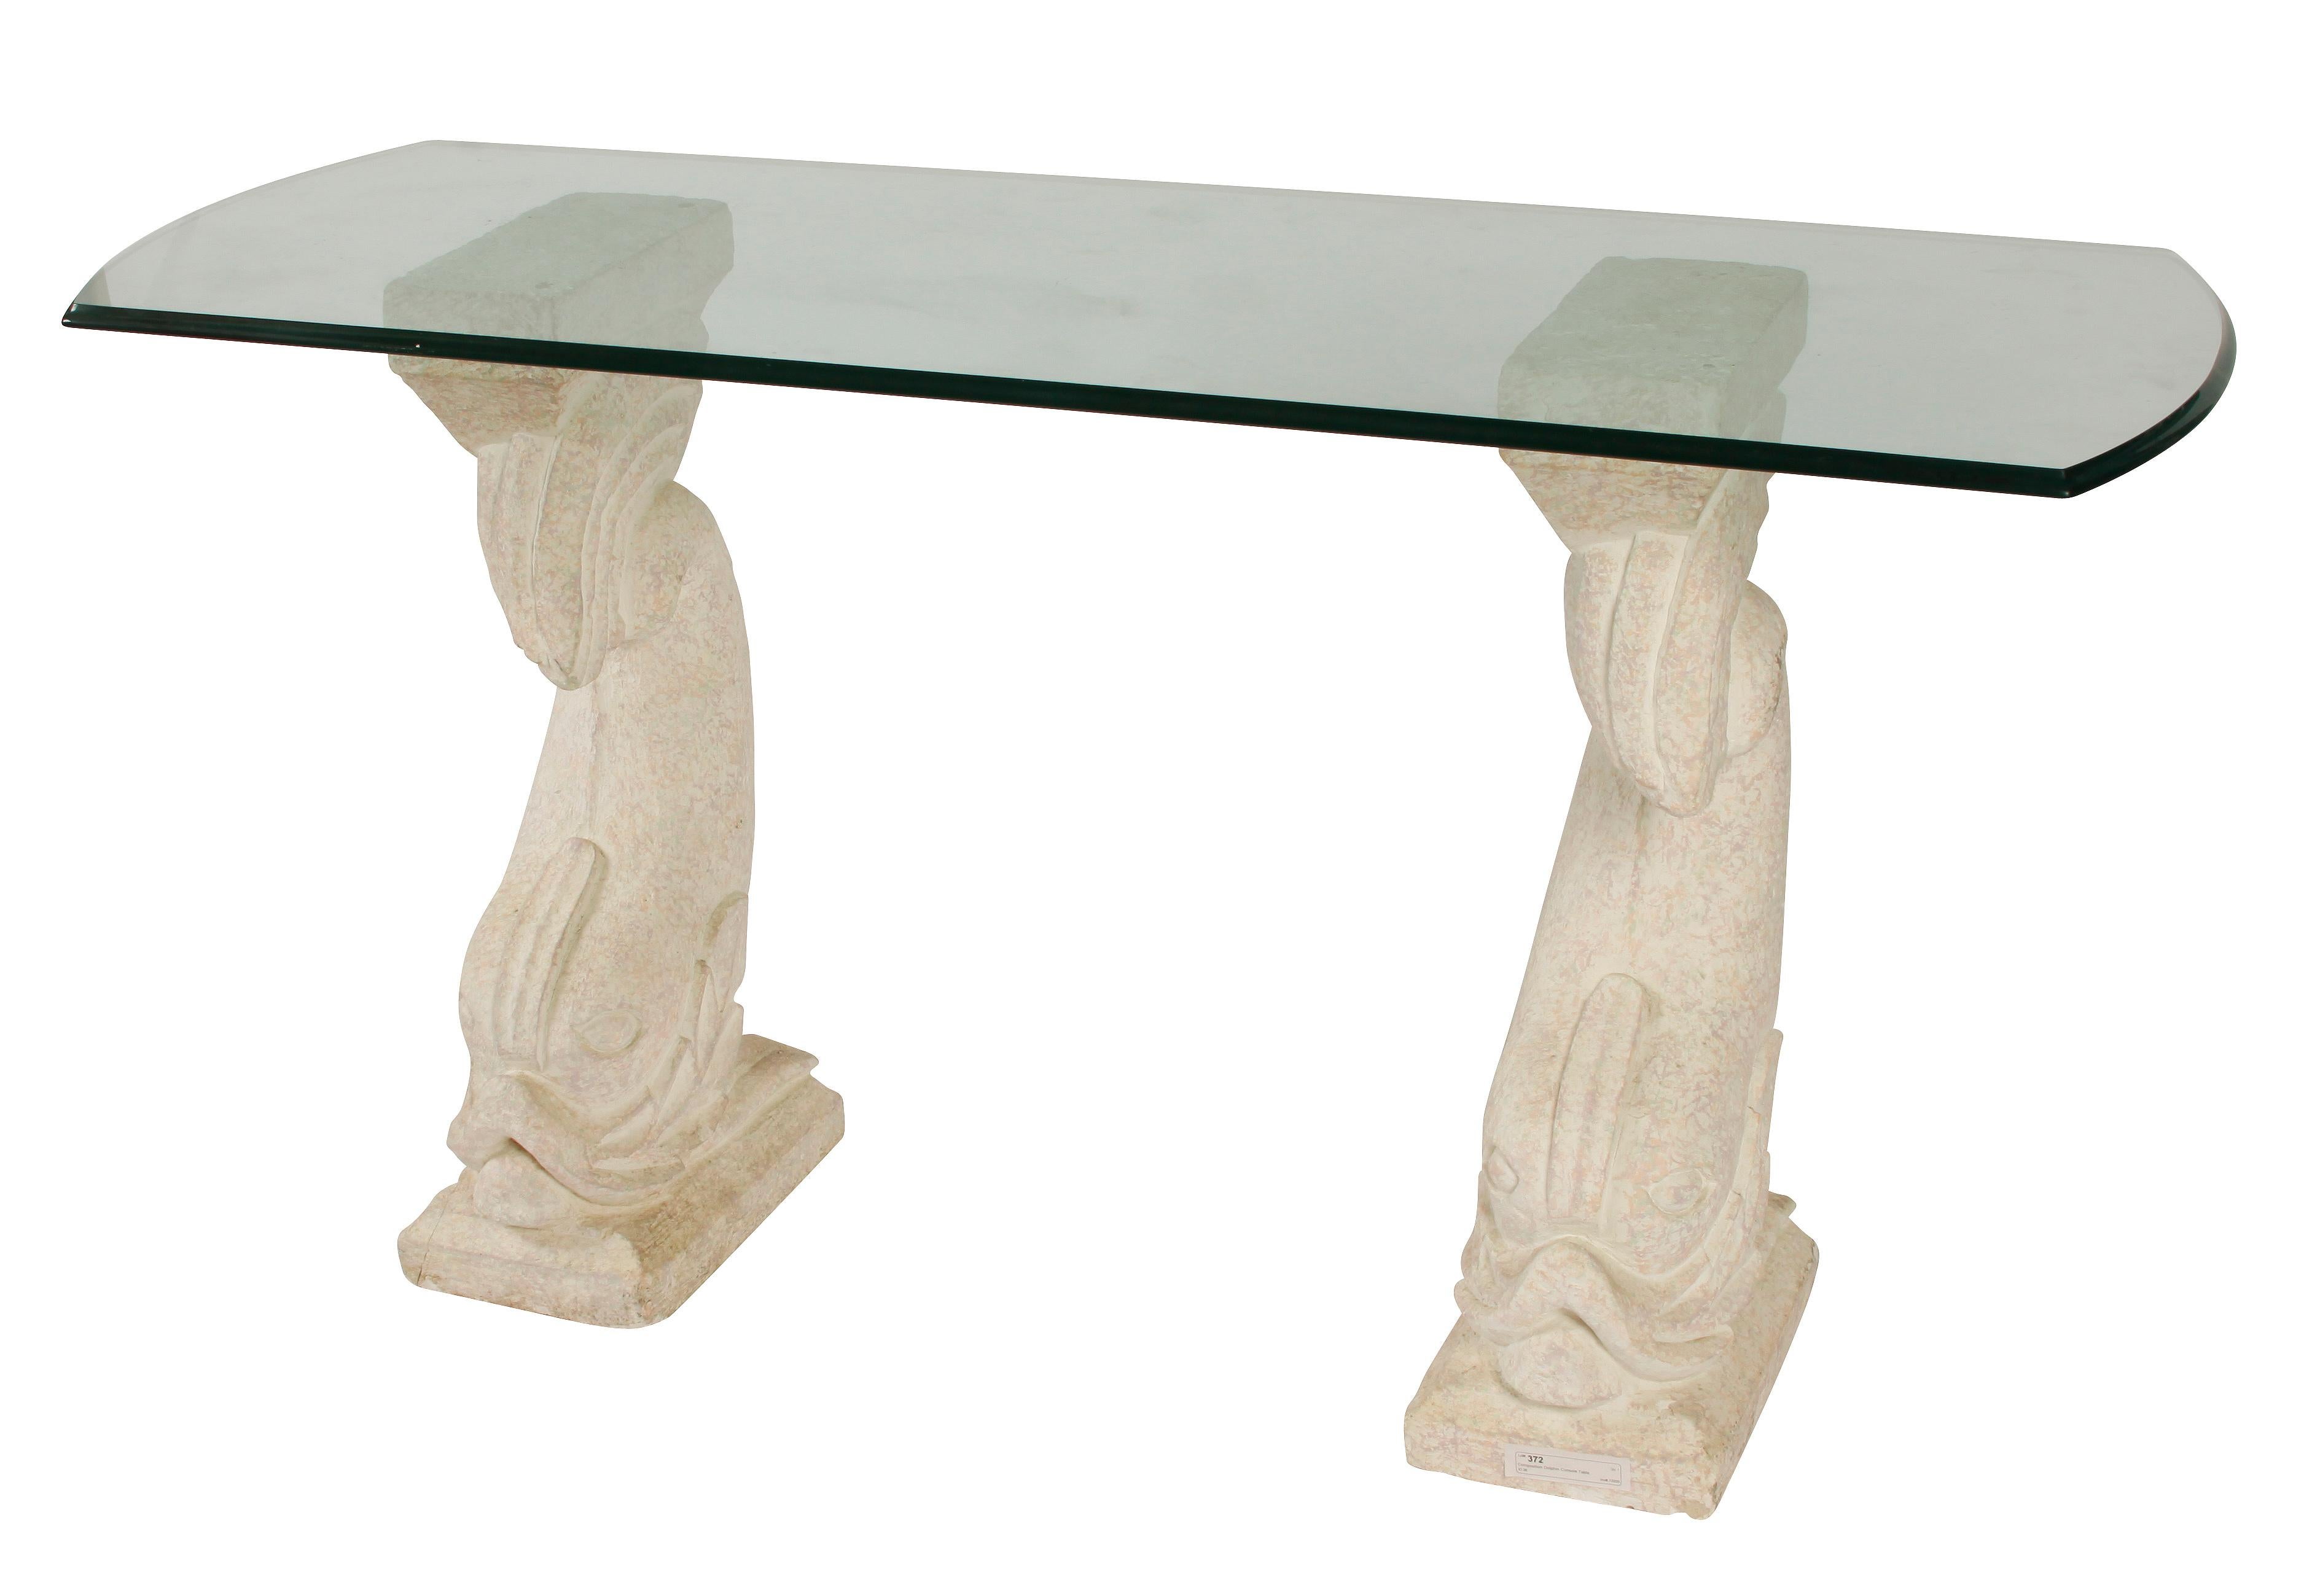 Vintage stone dolphin table with glass top.